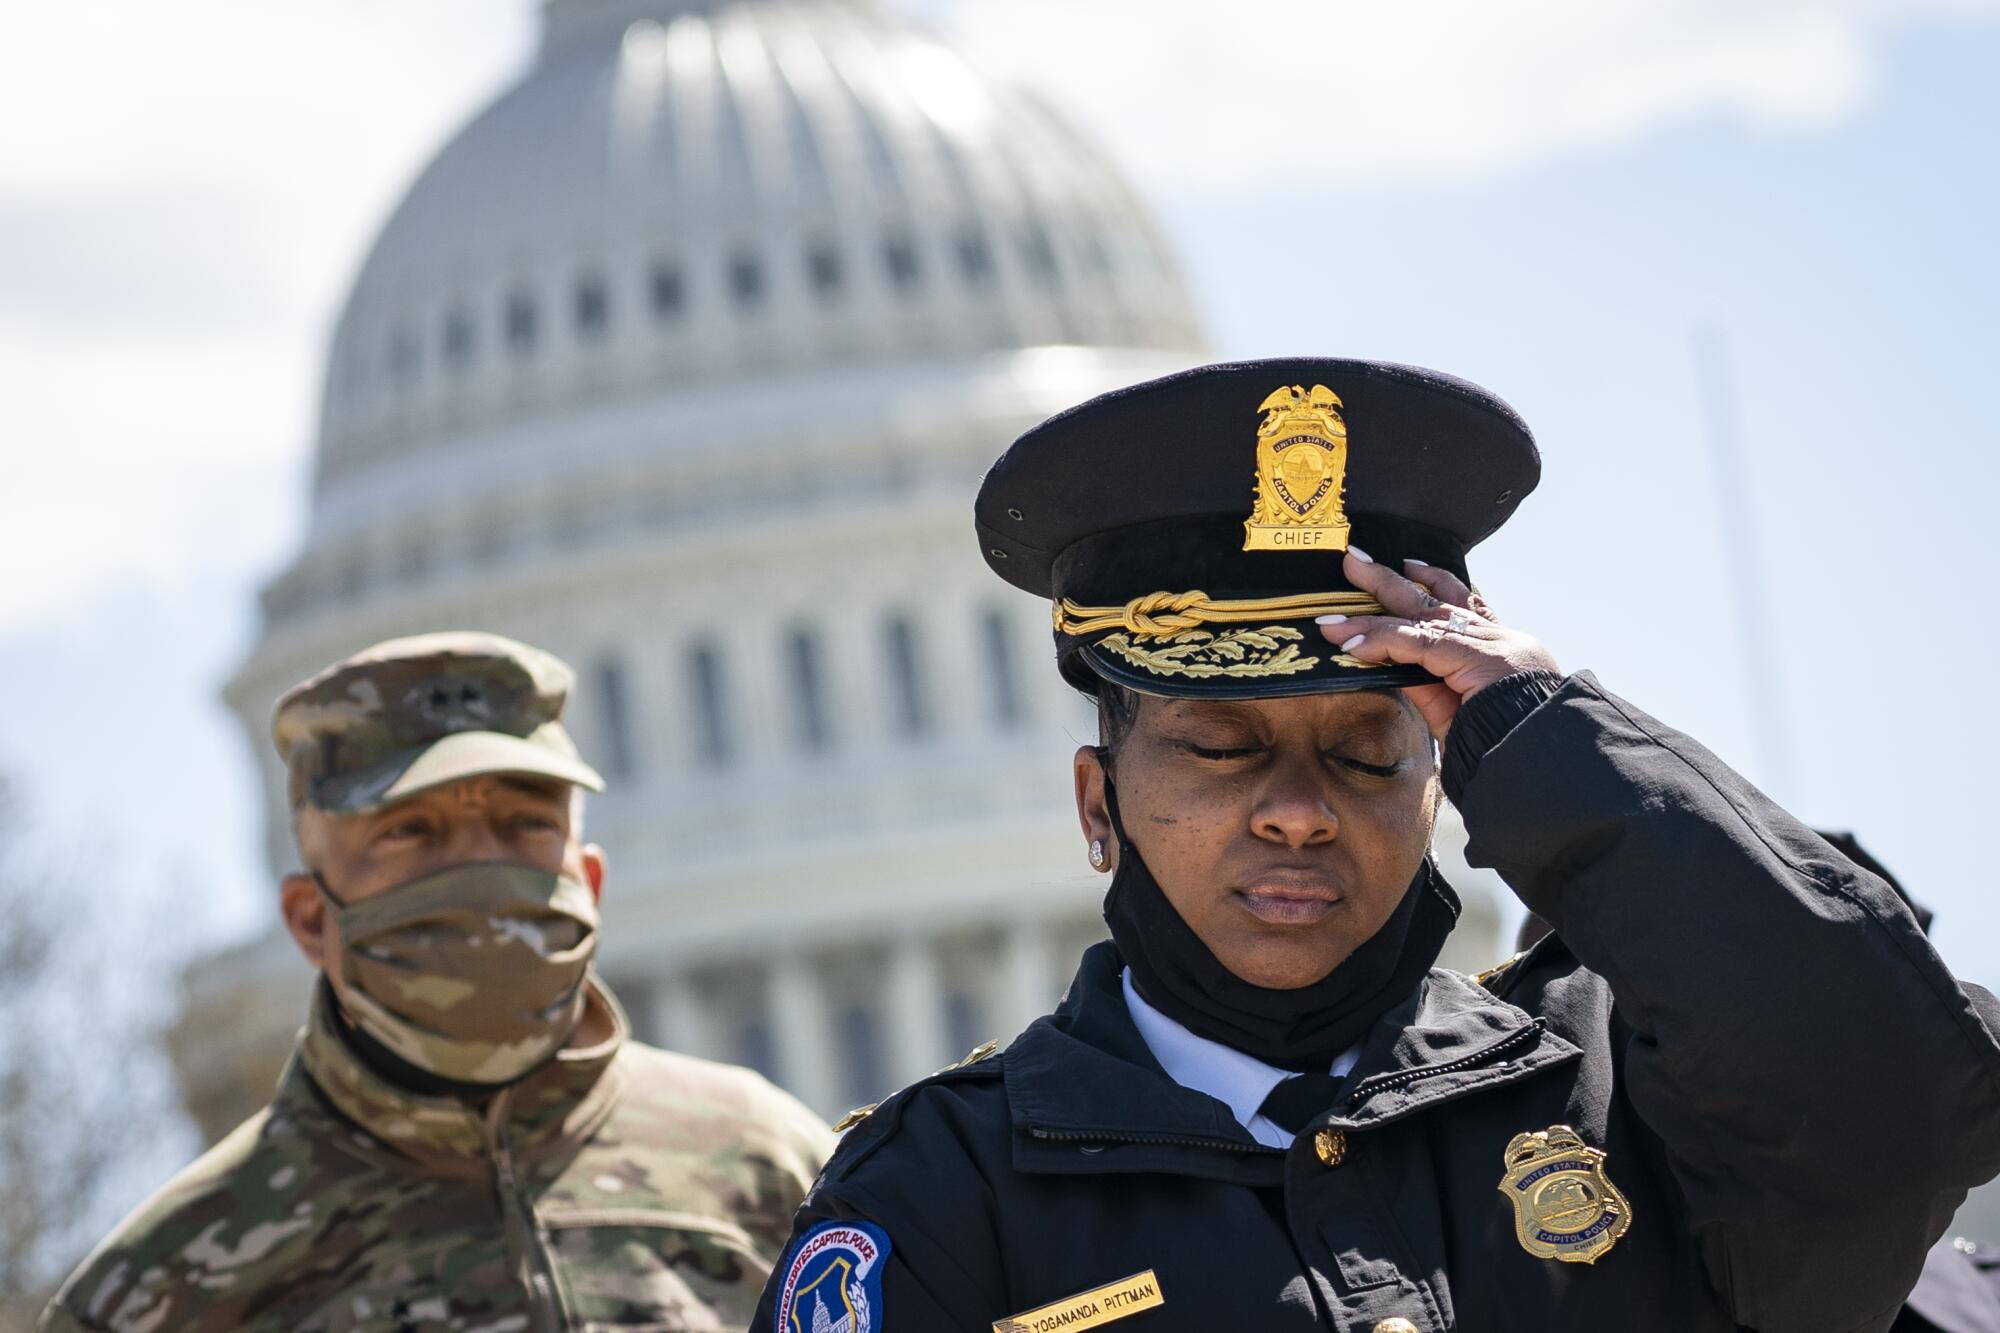 Acting Capitol Police Chief Yogananda Pittman (R) attends a press briefing about the security incident at the U.S. Capitol